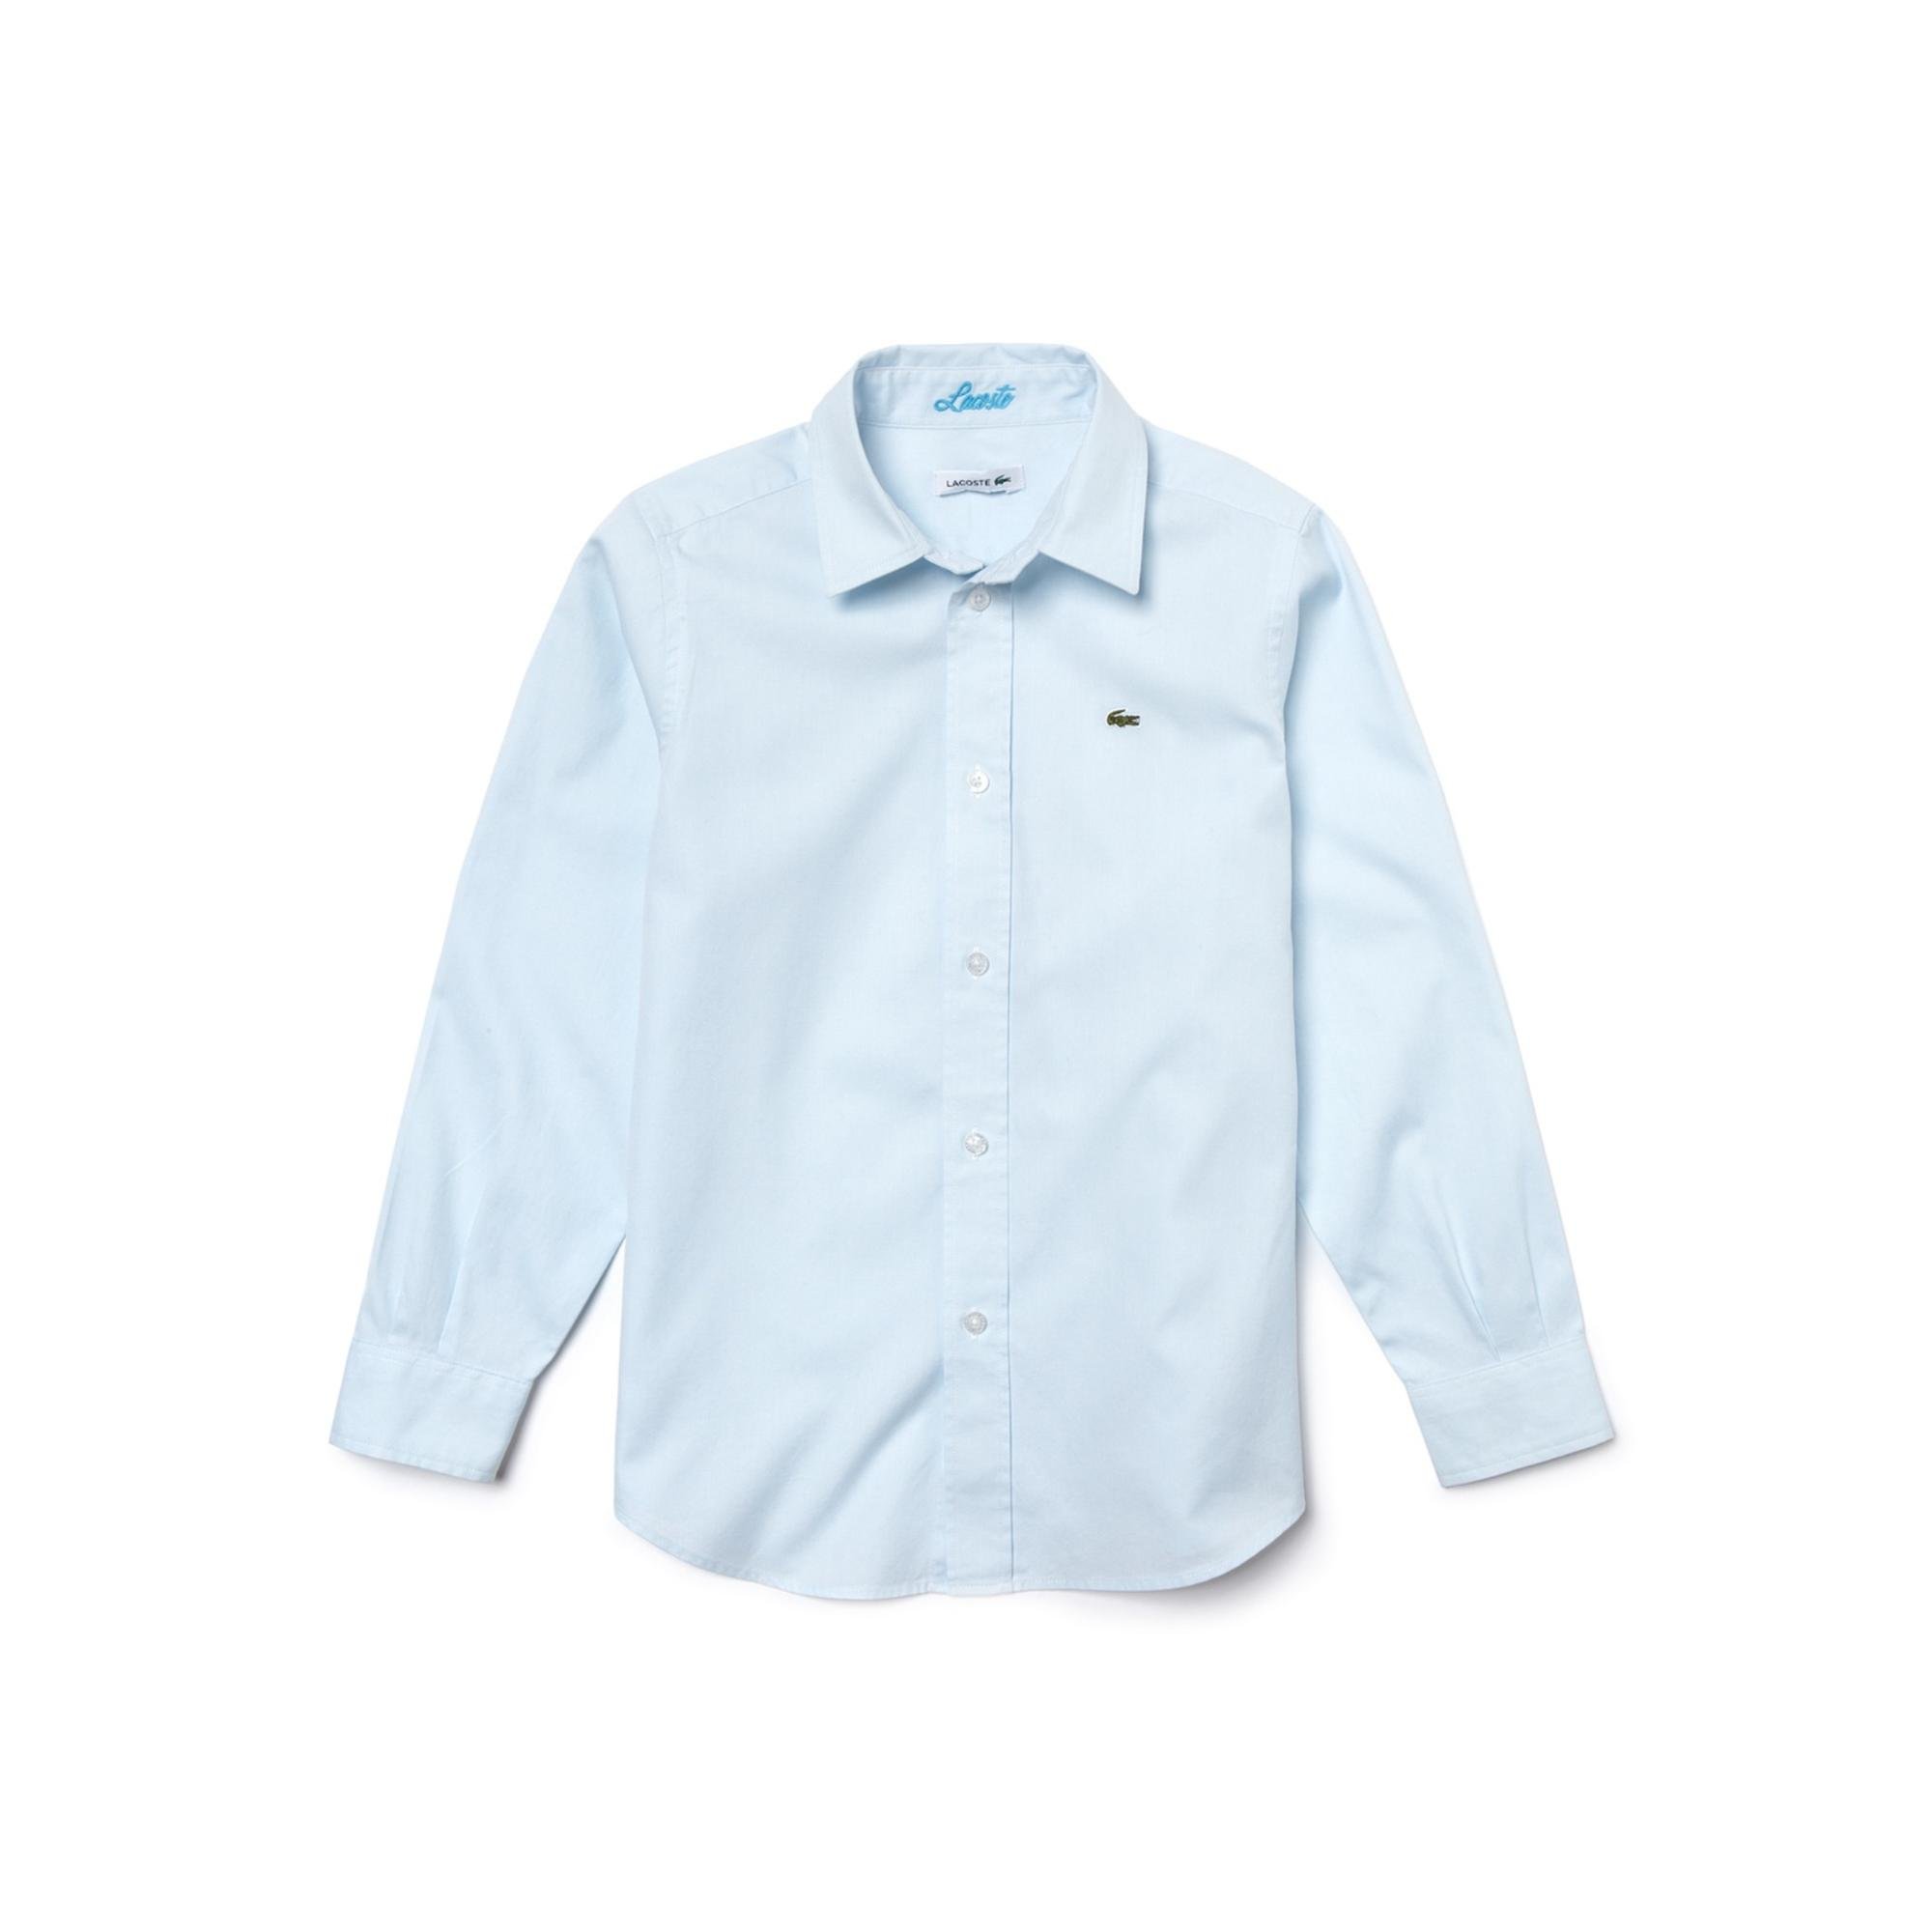 Lacoste Kids' Shirt in Oxford Cotton Knit